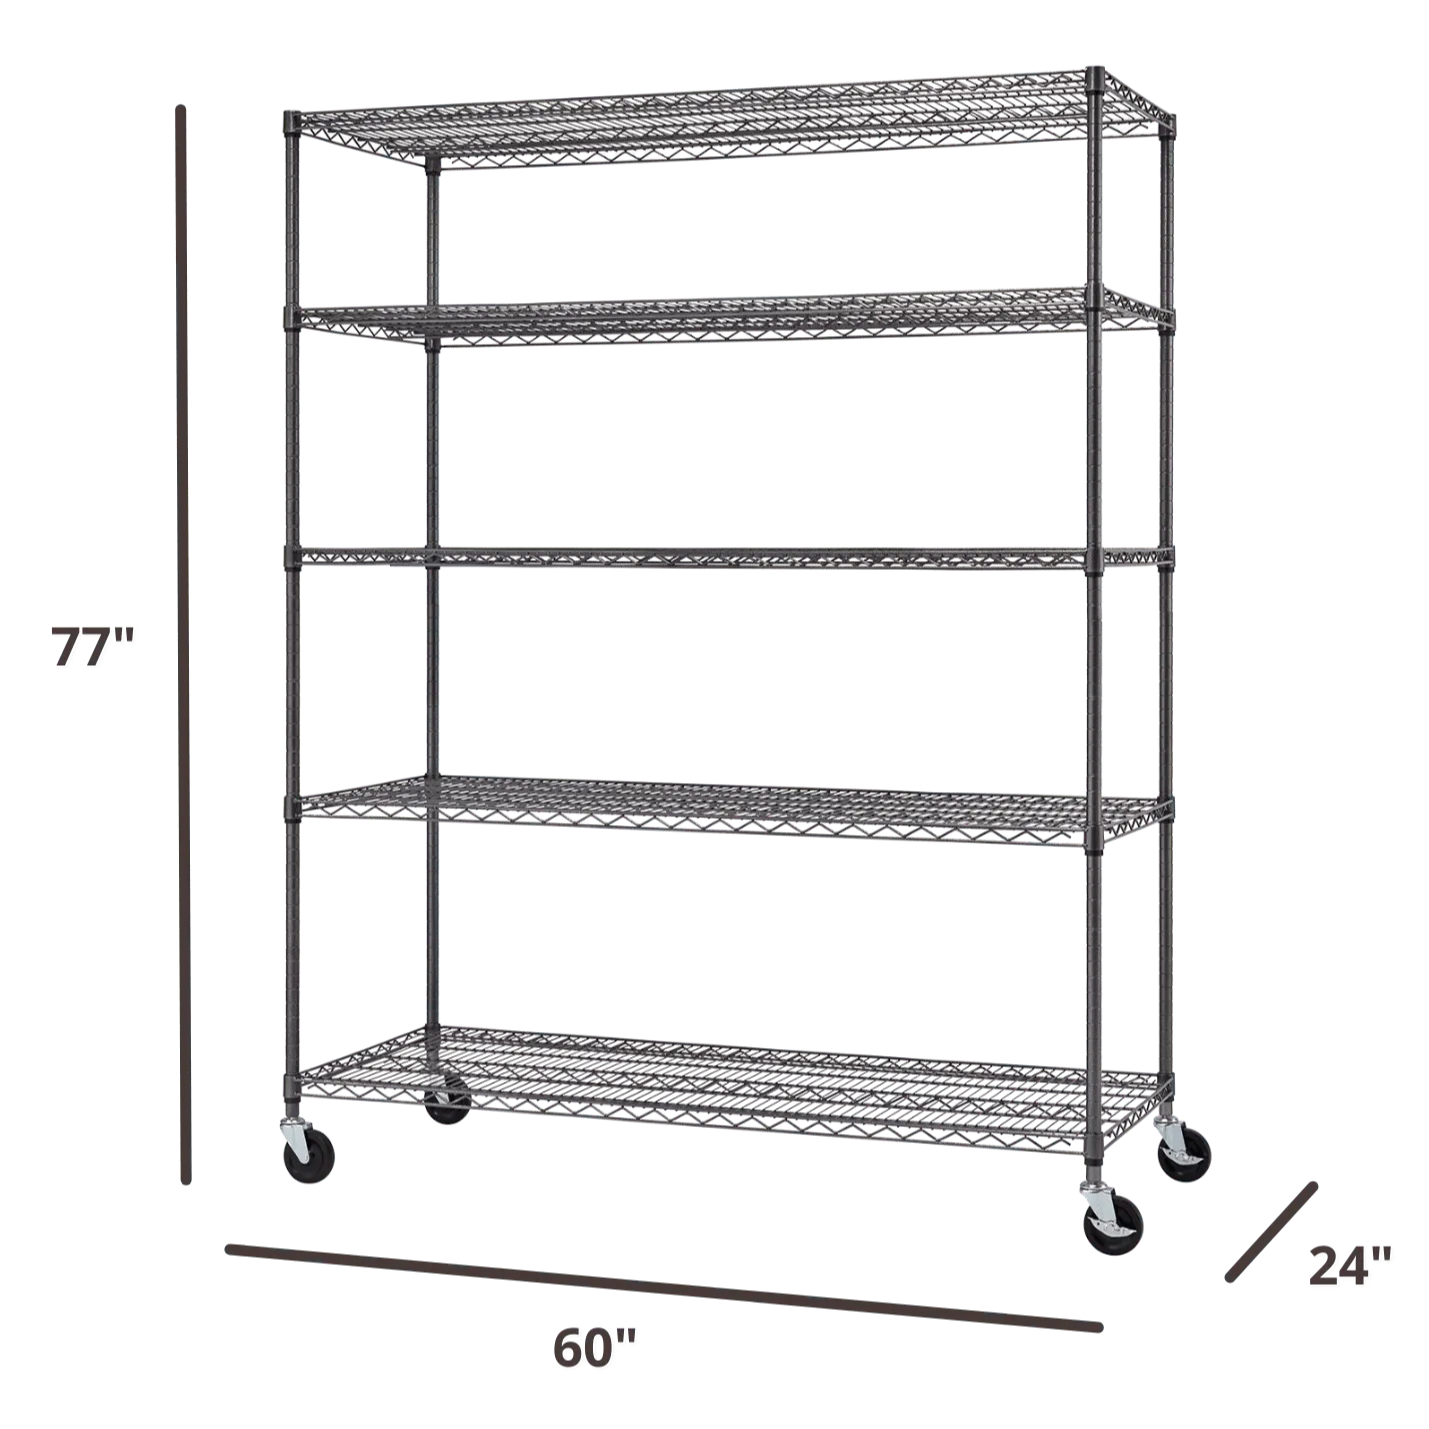 60 inches wide by 24 inches deep wire shelving rack